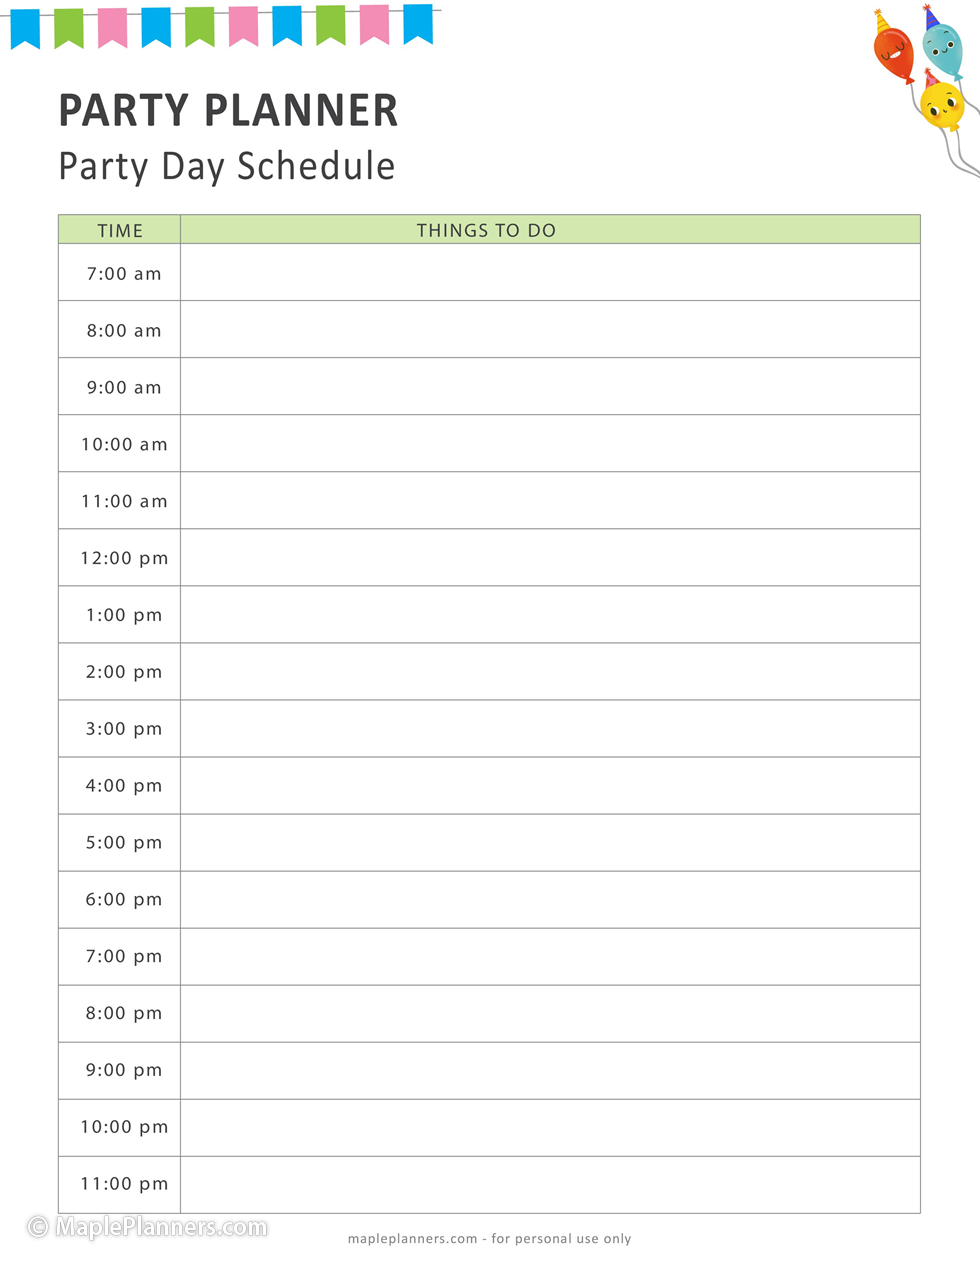 Party Day Schedule